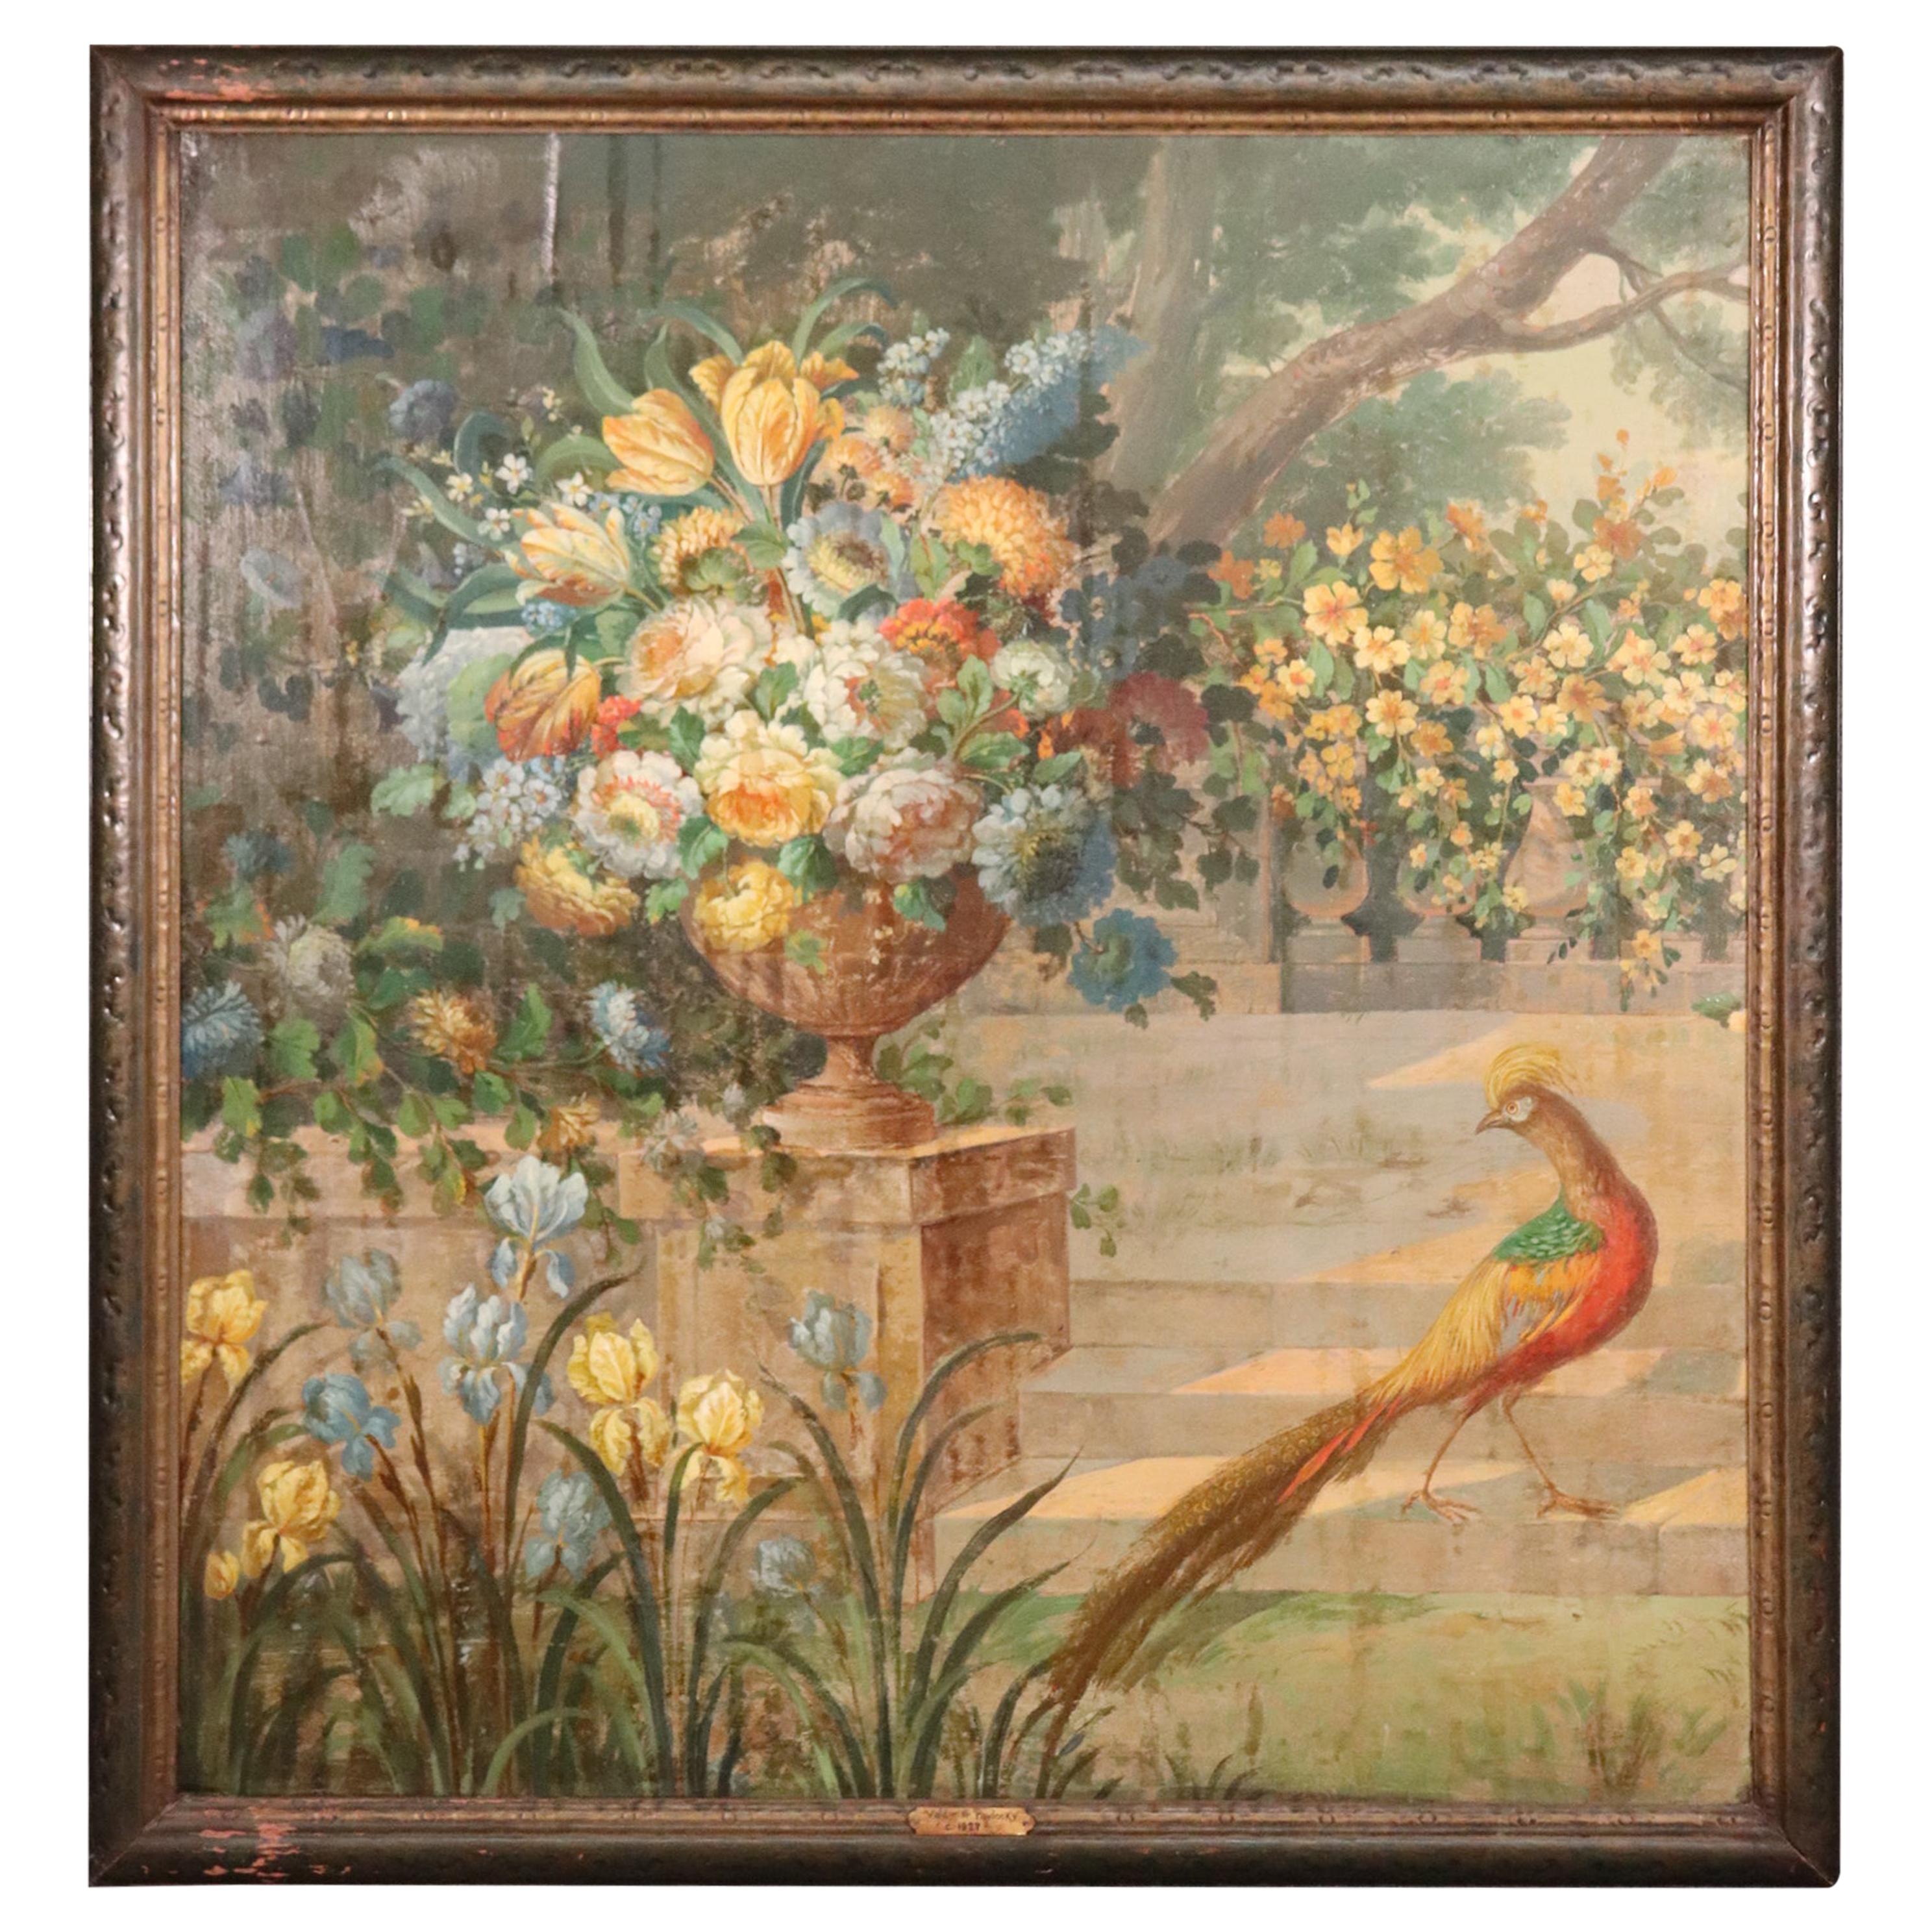 Signed Vladimir Pavlosky Oil on Canvas of Peackcock and Flowers Dated 1927